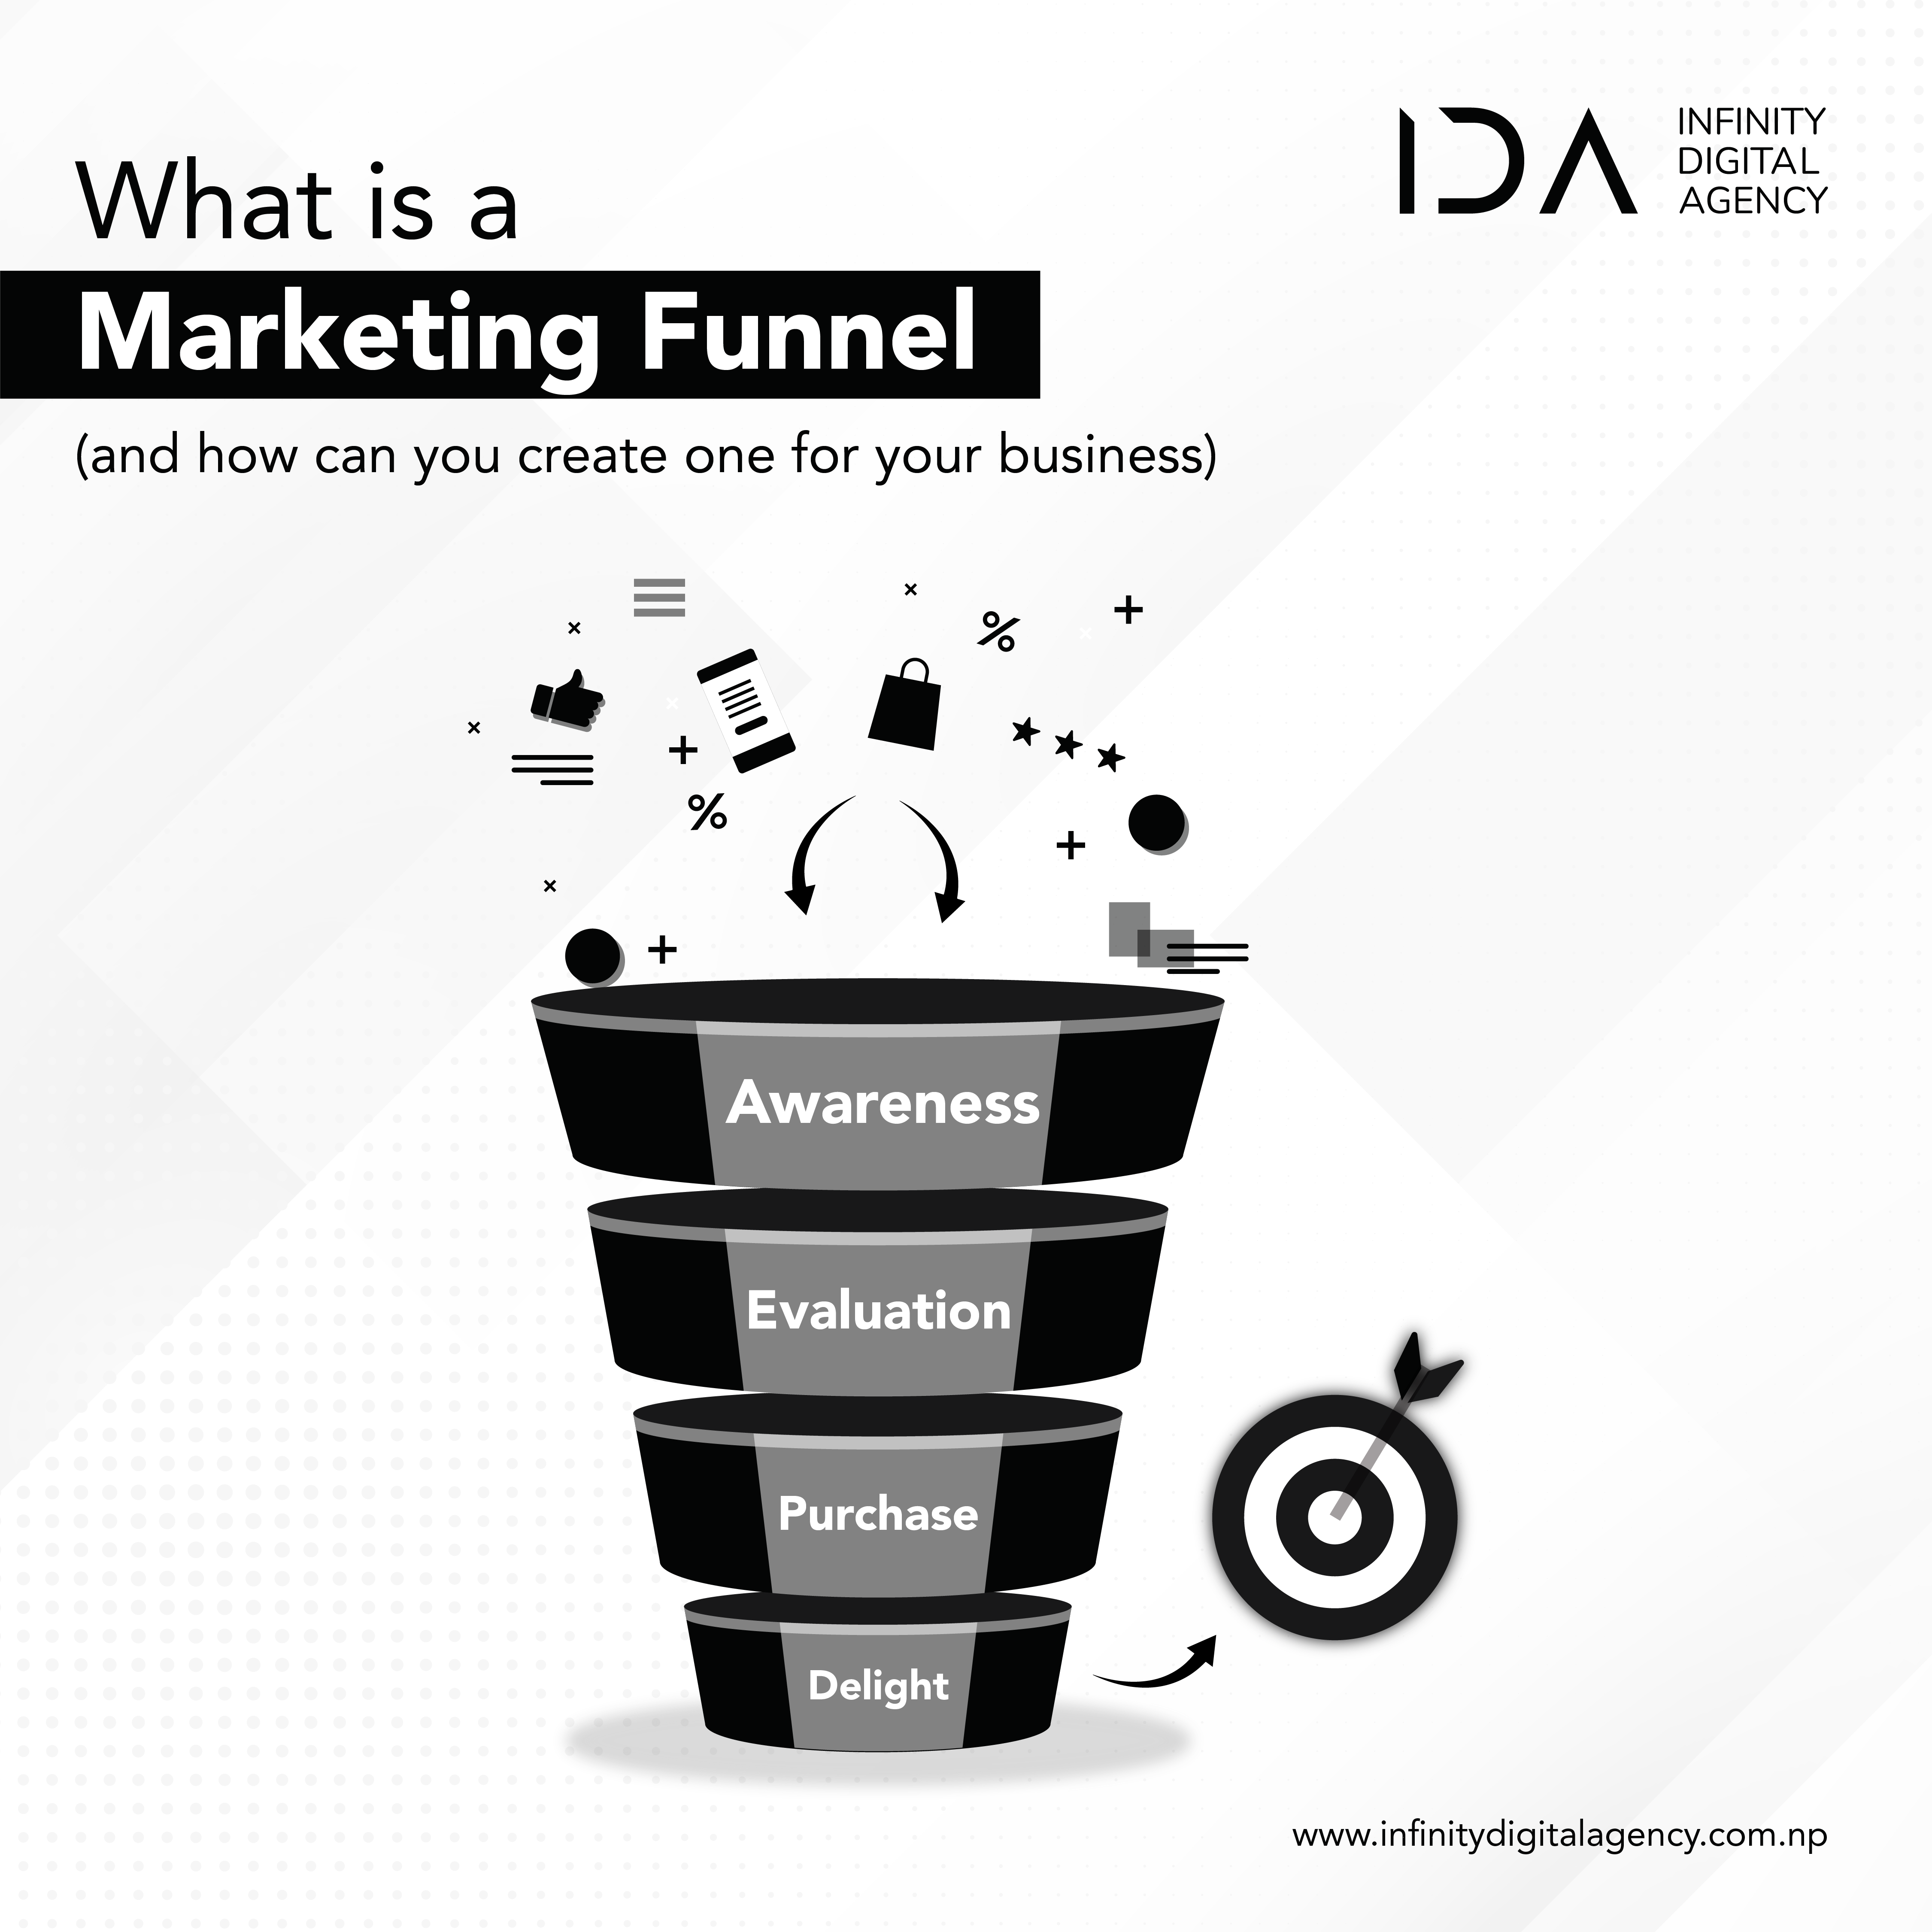 WHAT IS A MARKETING FUNNEL?